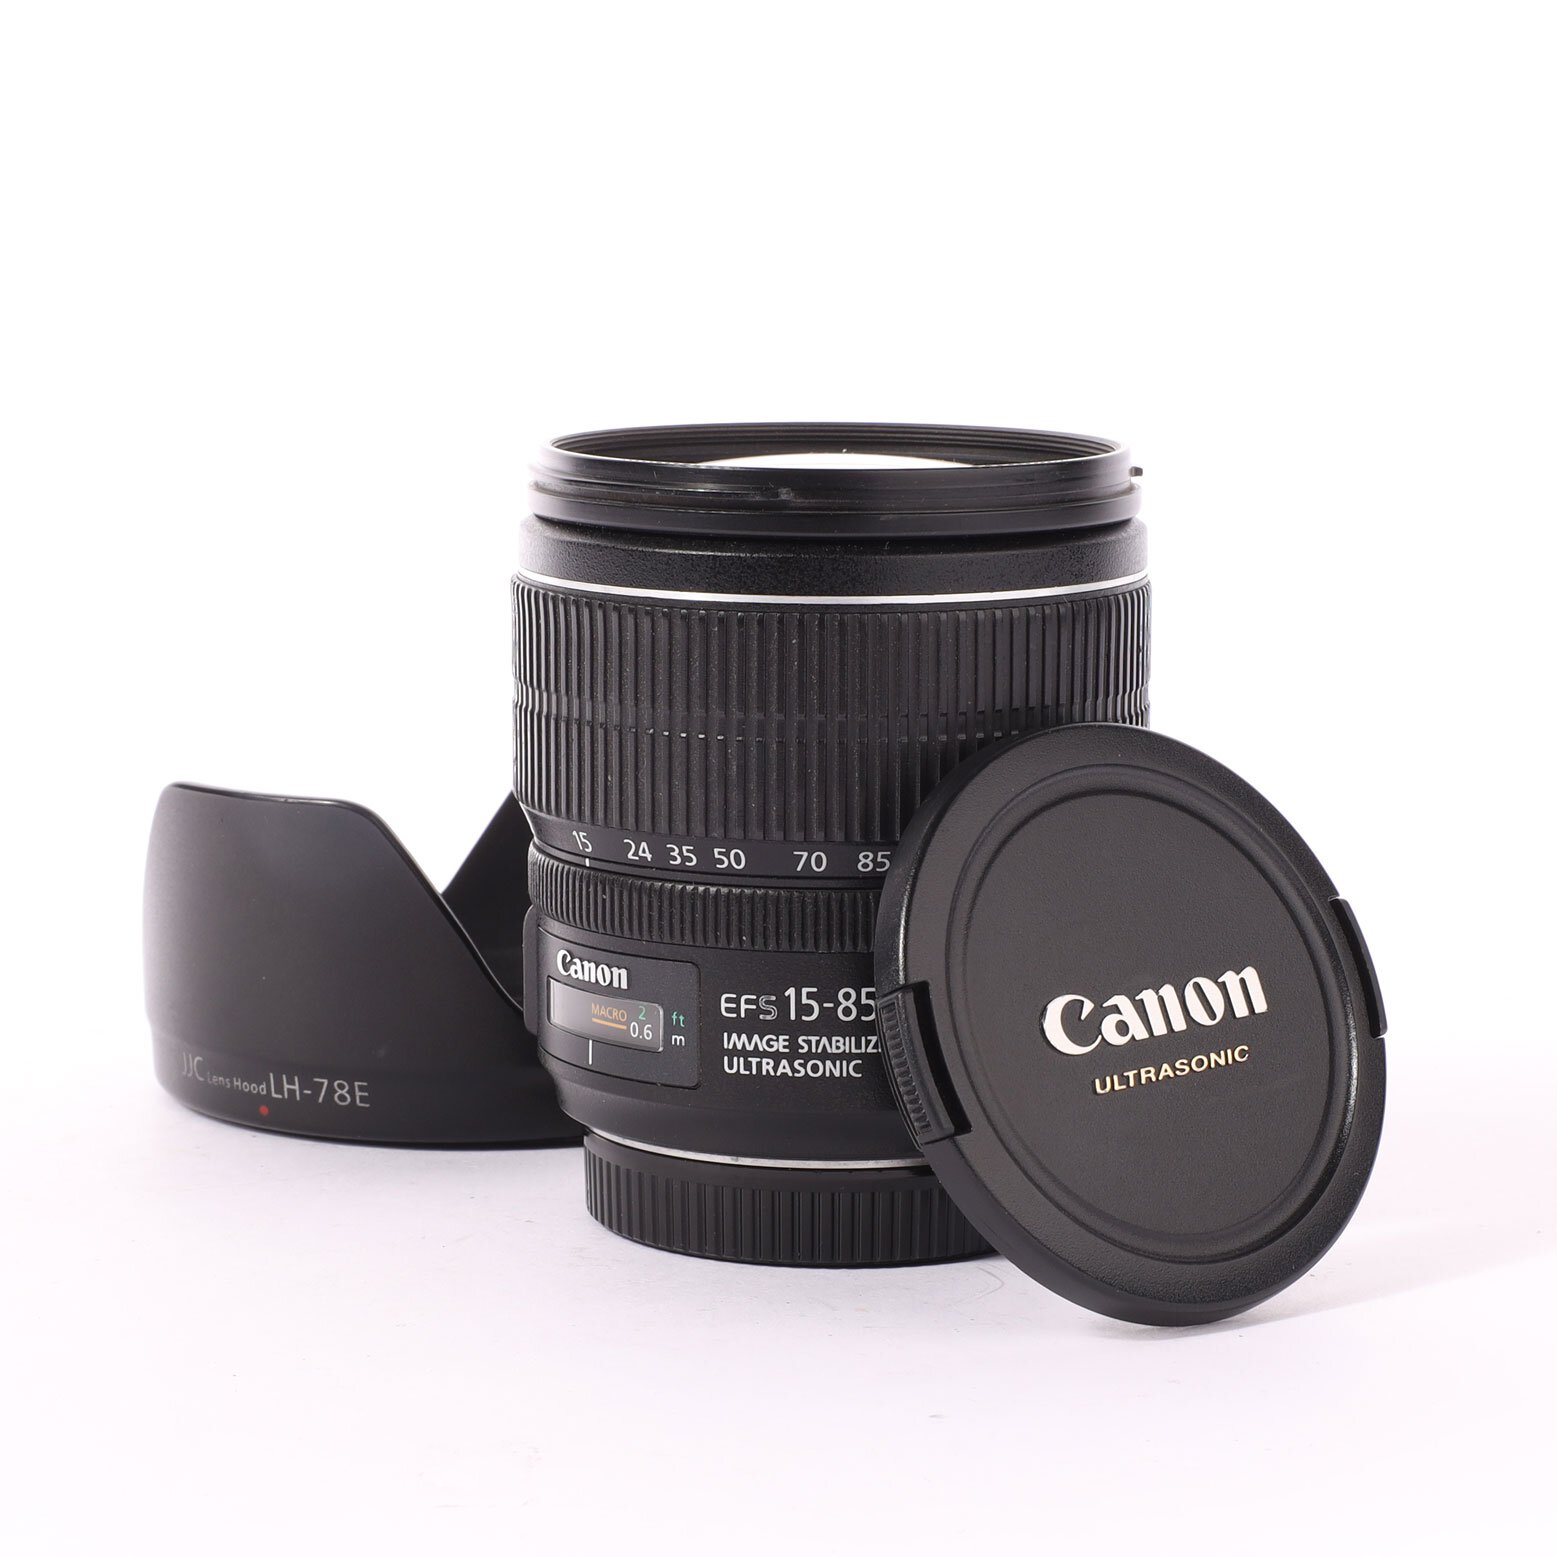 Canon EFS 3.5-5-6/15-85mm IS USM